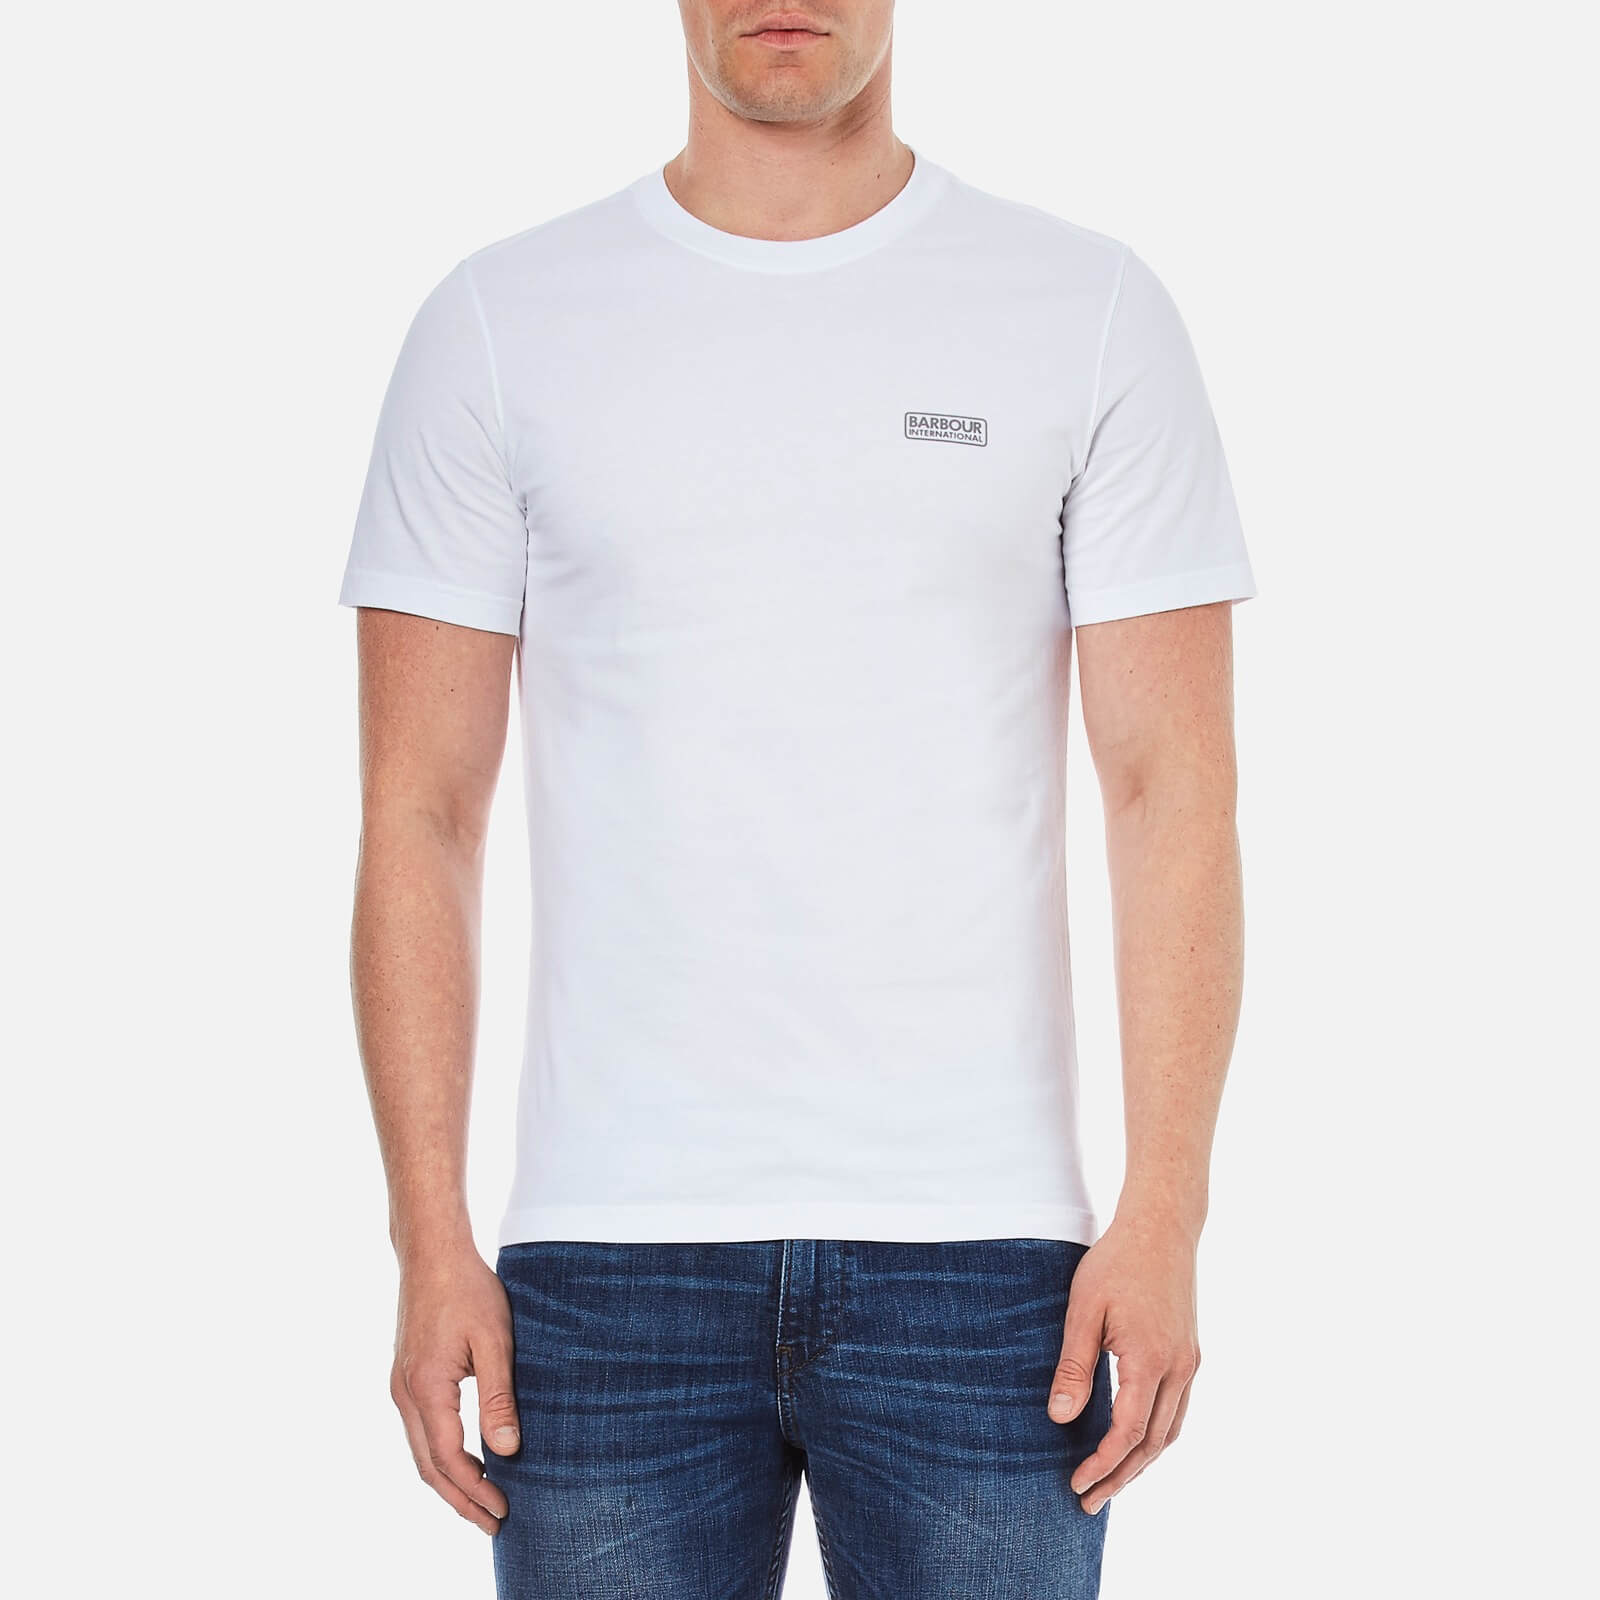 barbour t shirt white